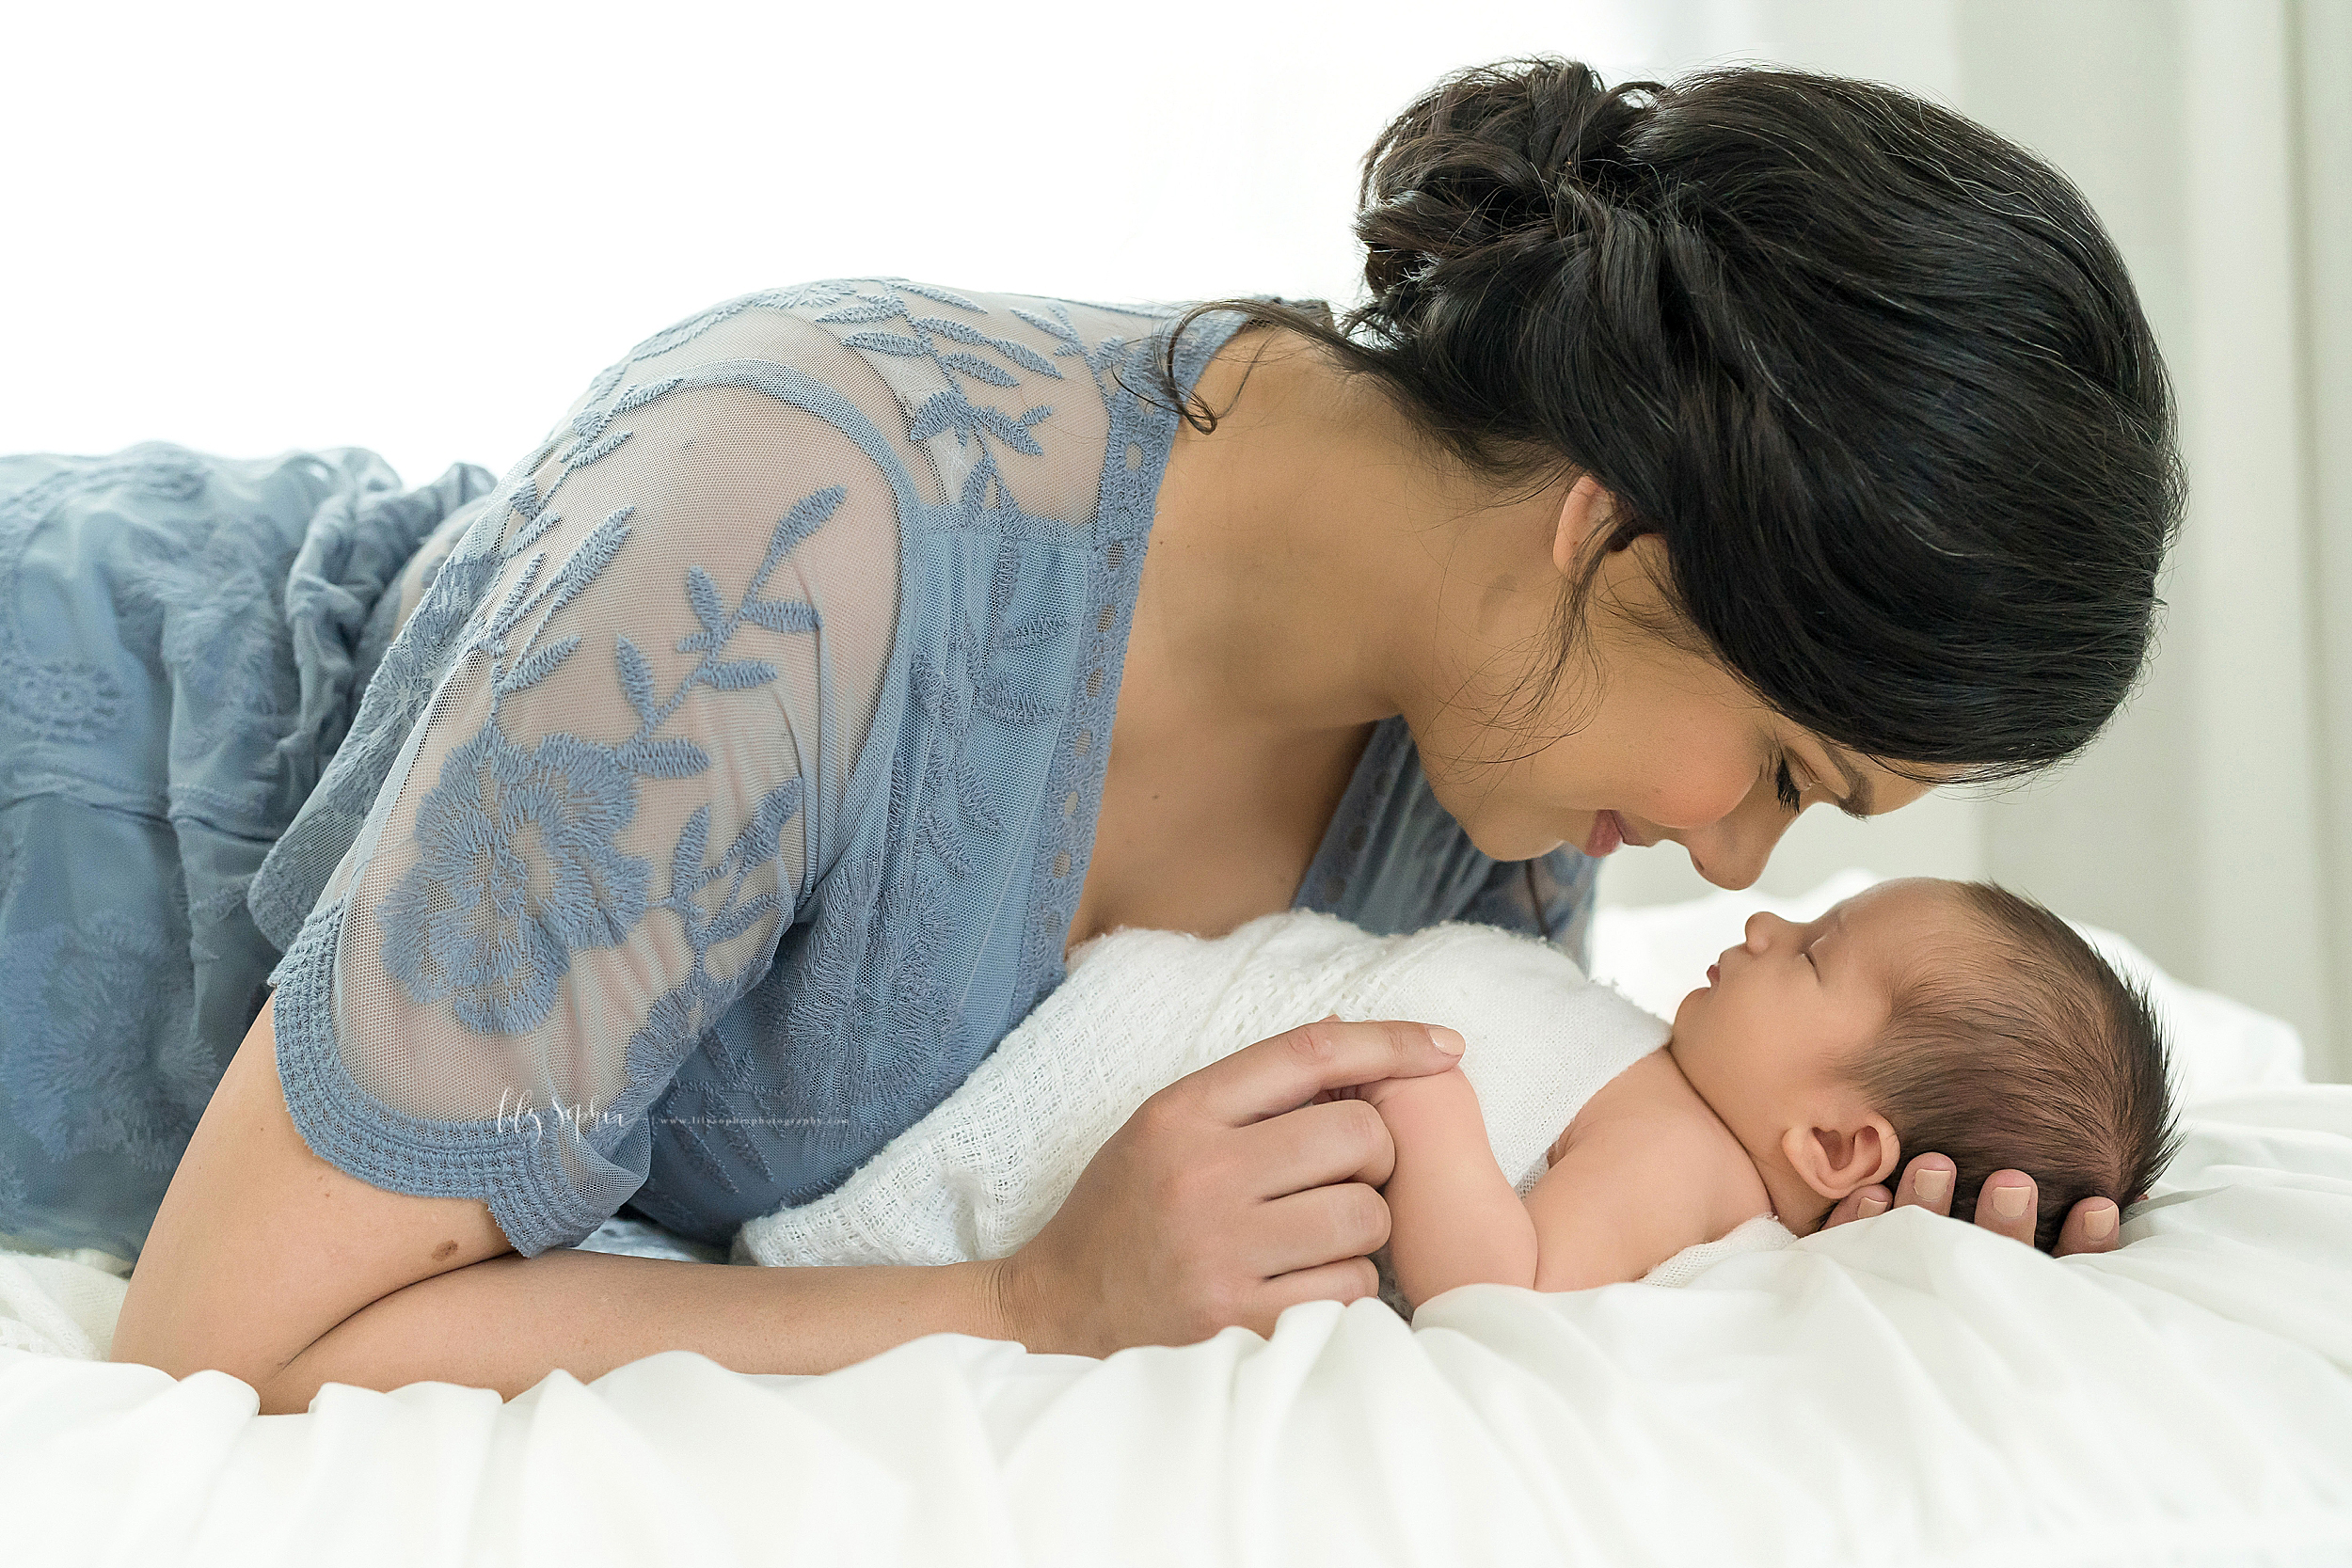  Brunette mother dressed in a blue lace dress is lying on a bed holding the hand of her infant son.  Her infant son is wrapped in a white blanket lying on his back sound asleep.  Mom is lovingly staring her infant son. 